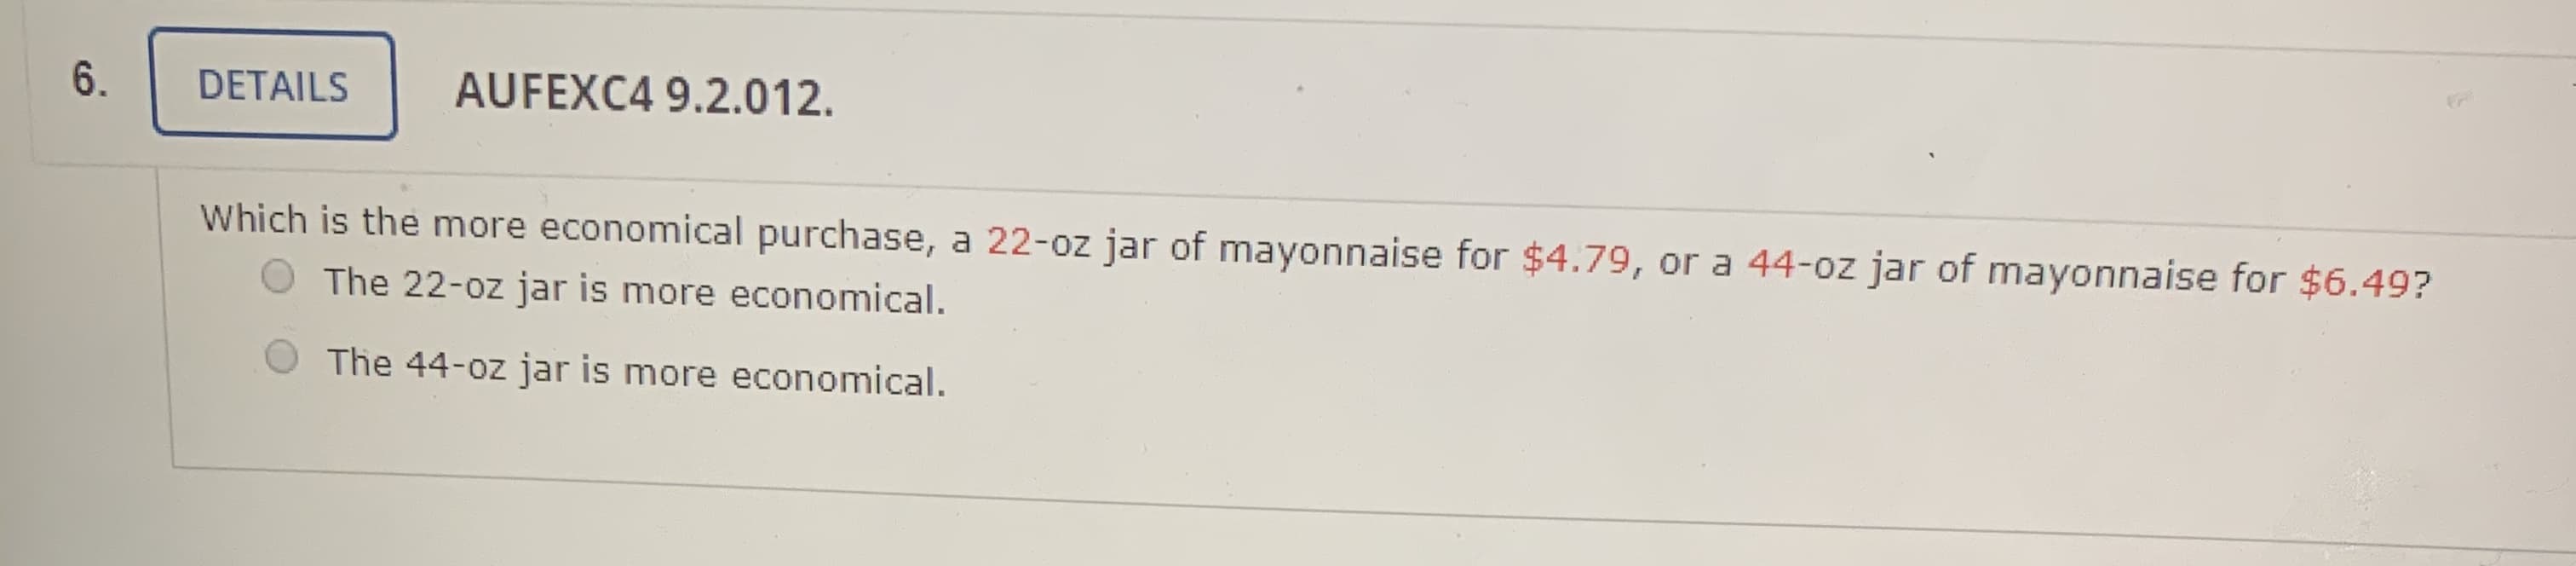 Which is the more economical purchase, a 22-oz jar of mayonnaise for $4.79, or a 44-0z jar of mayonnaise for $6.49?
The 22-oz jar is more economical.
The 44-oz jar is more economical.
